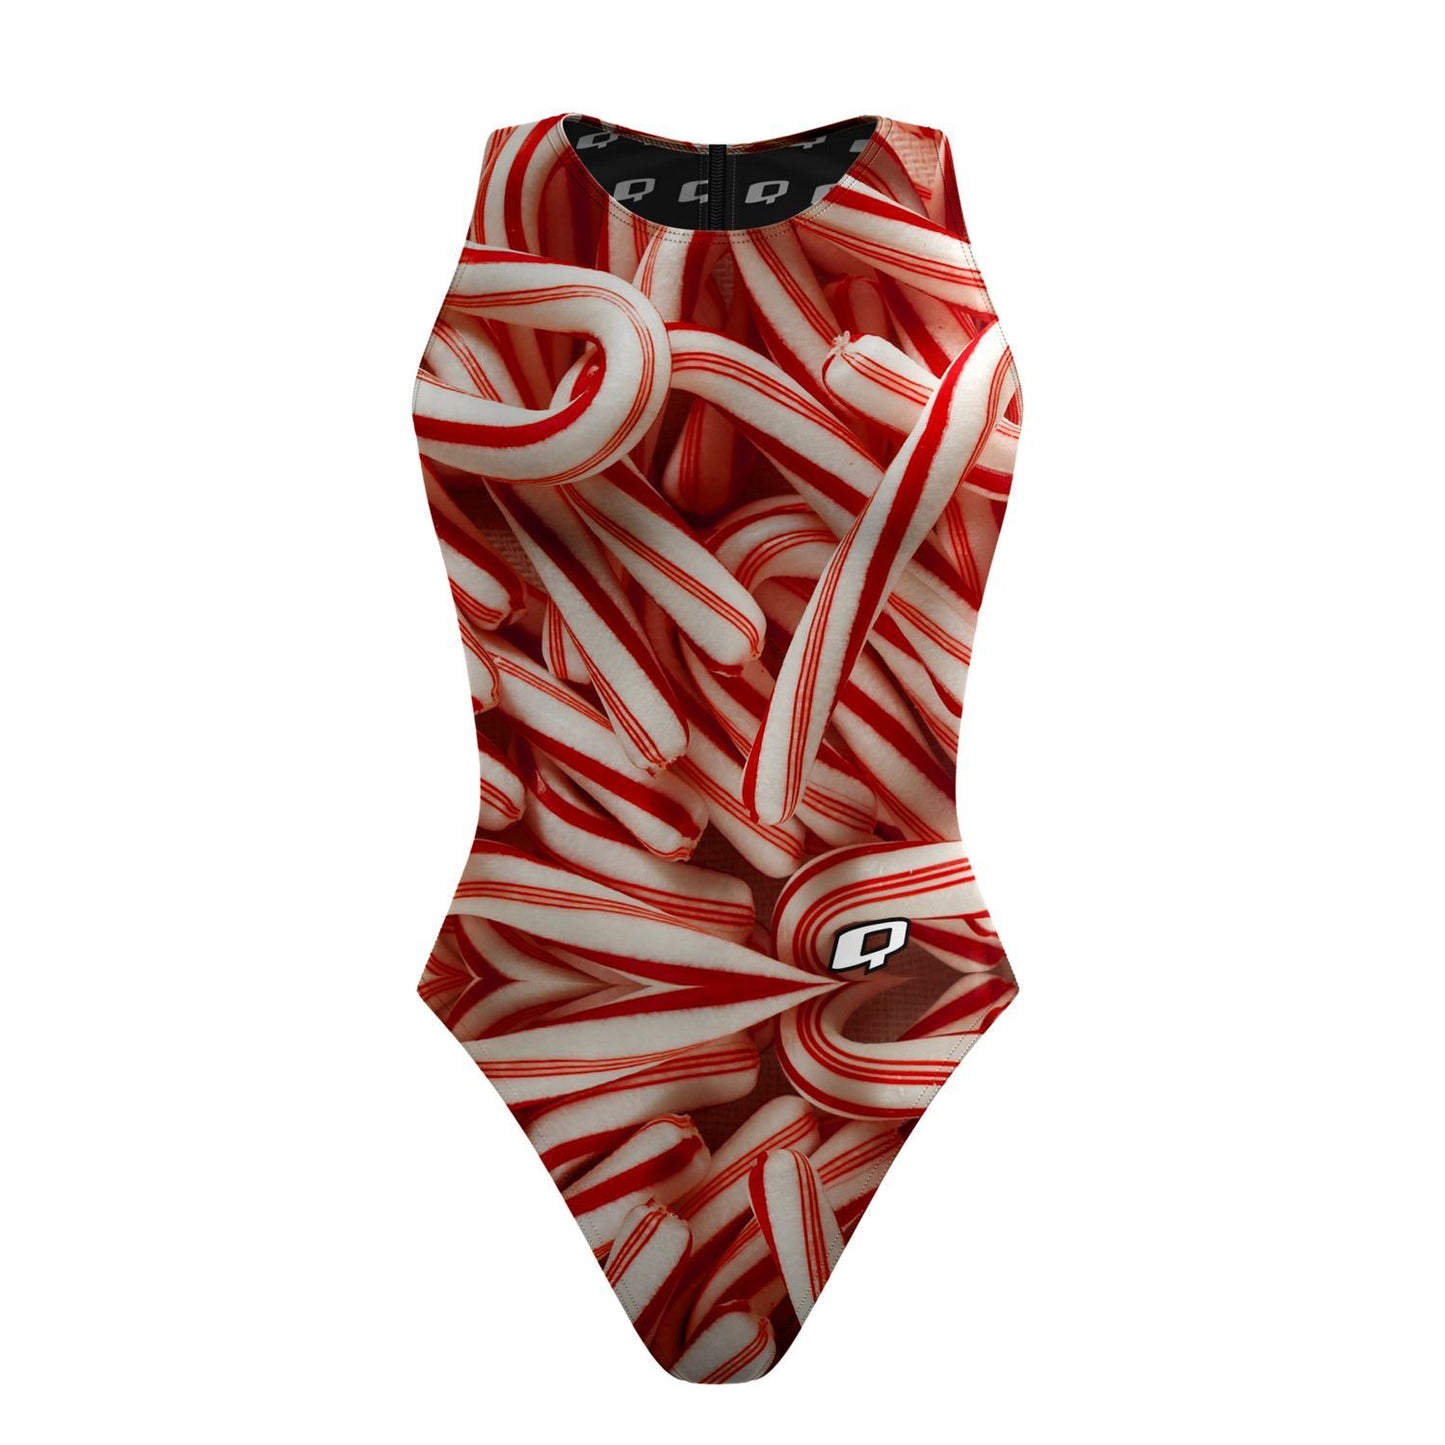 Candy Cane Waterpolo